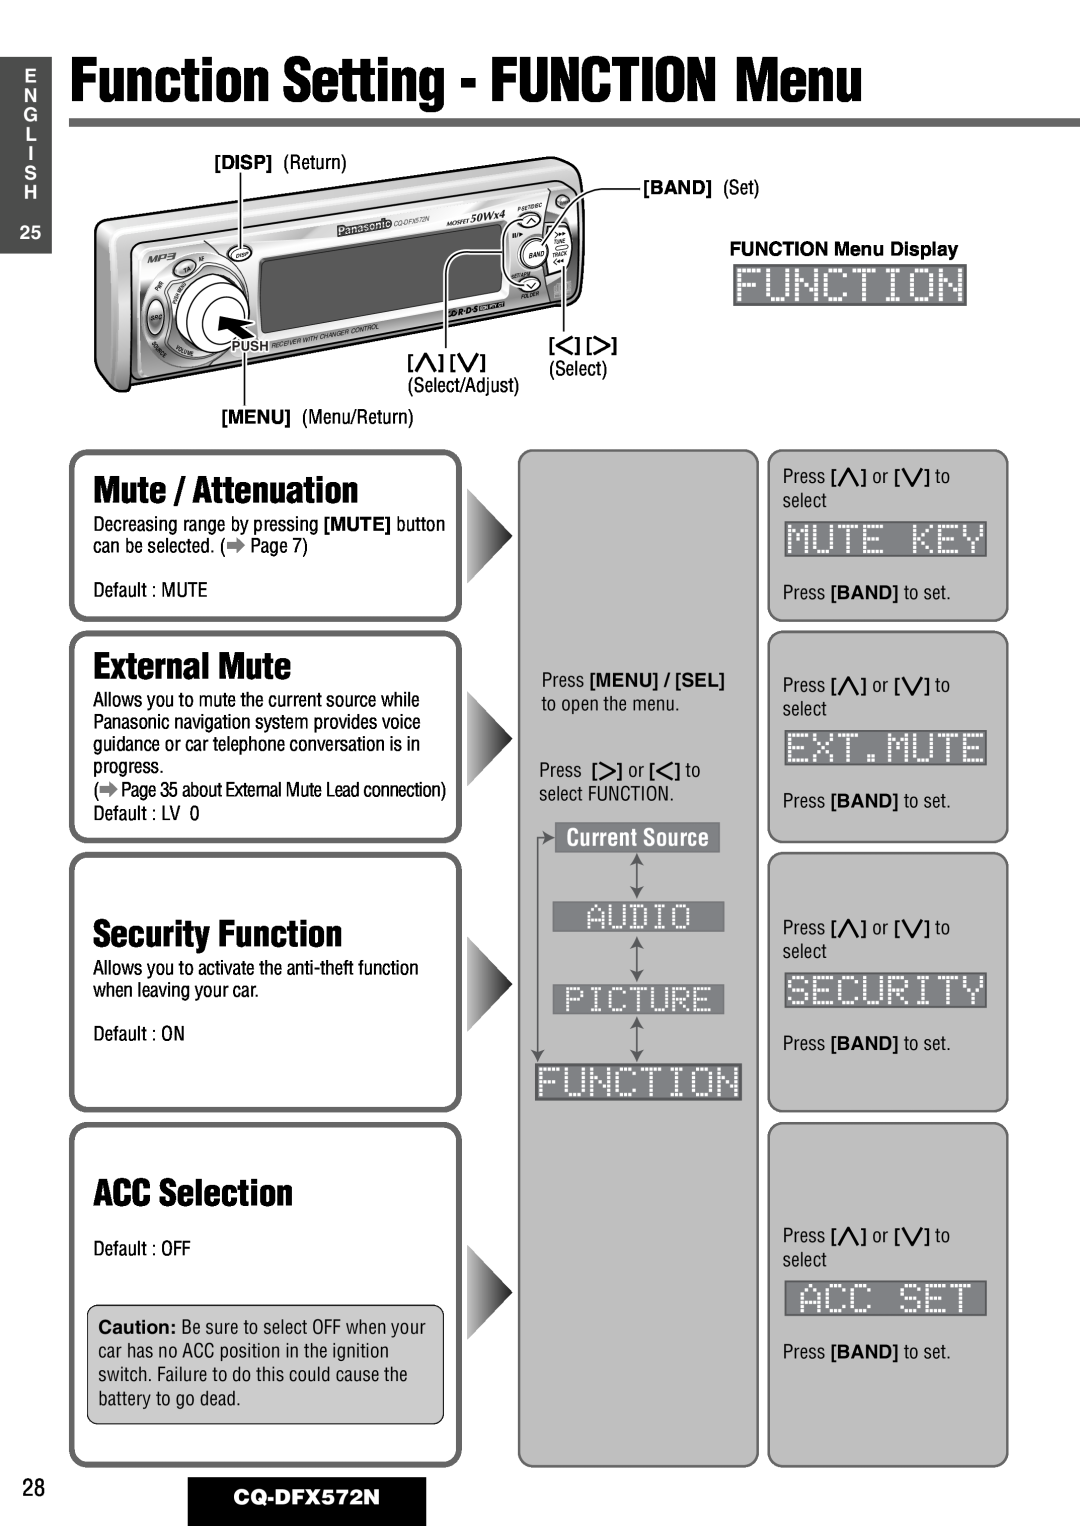 Panasonic Function Setting - FUNCTION Menu, External Mute, Security Function, ACC Selection, 28CQ-DFX572N, Push, With 